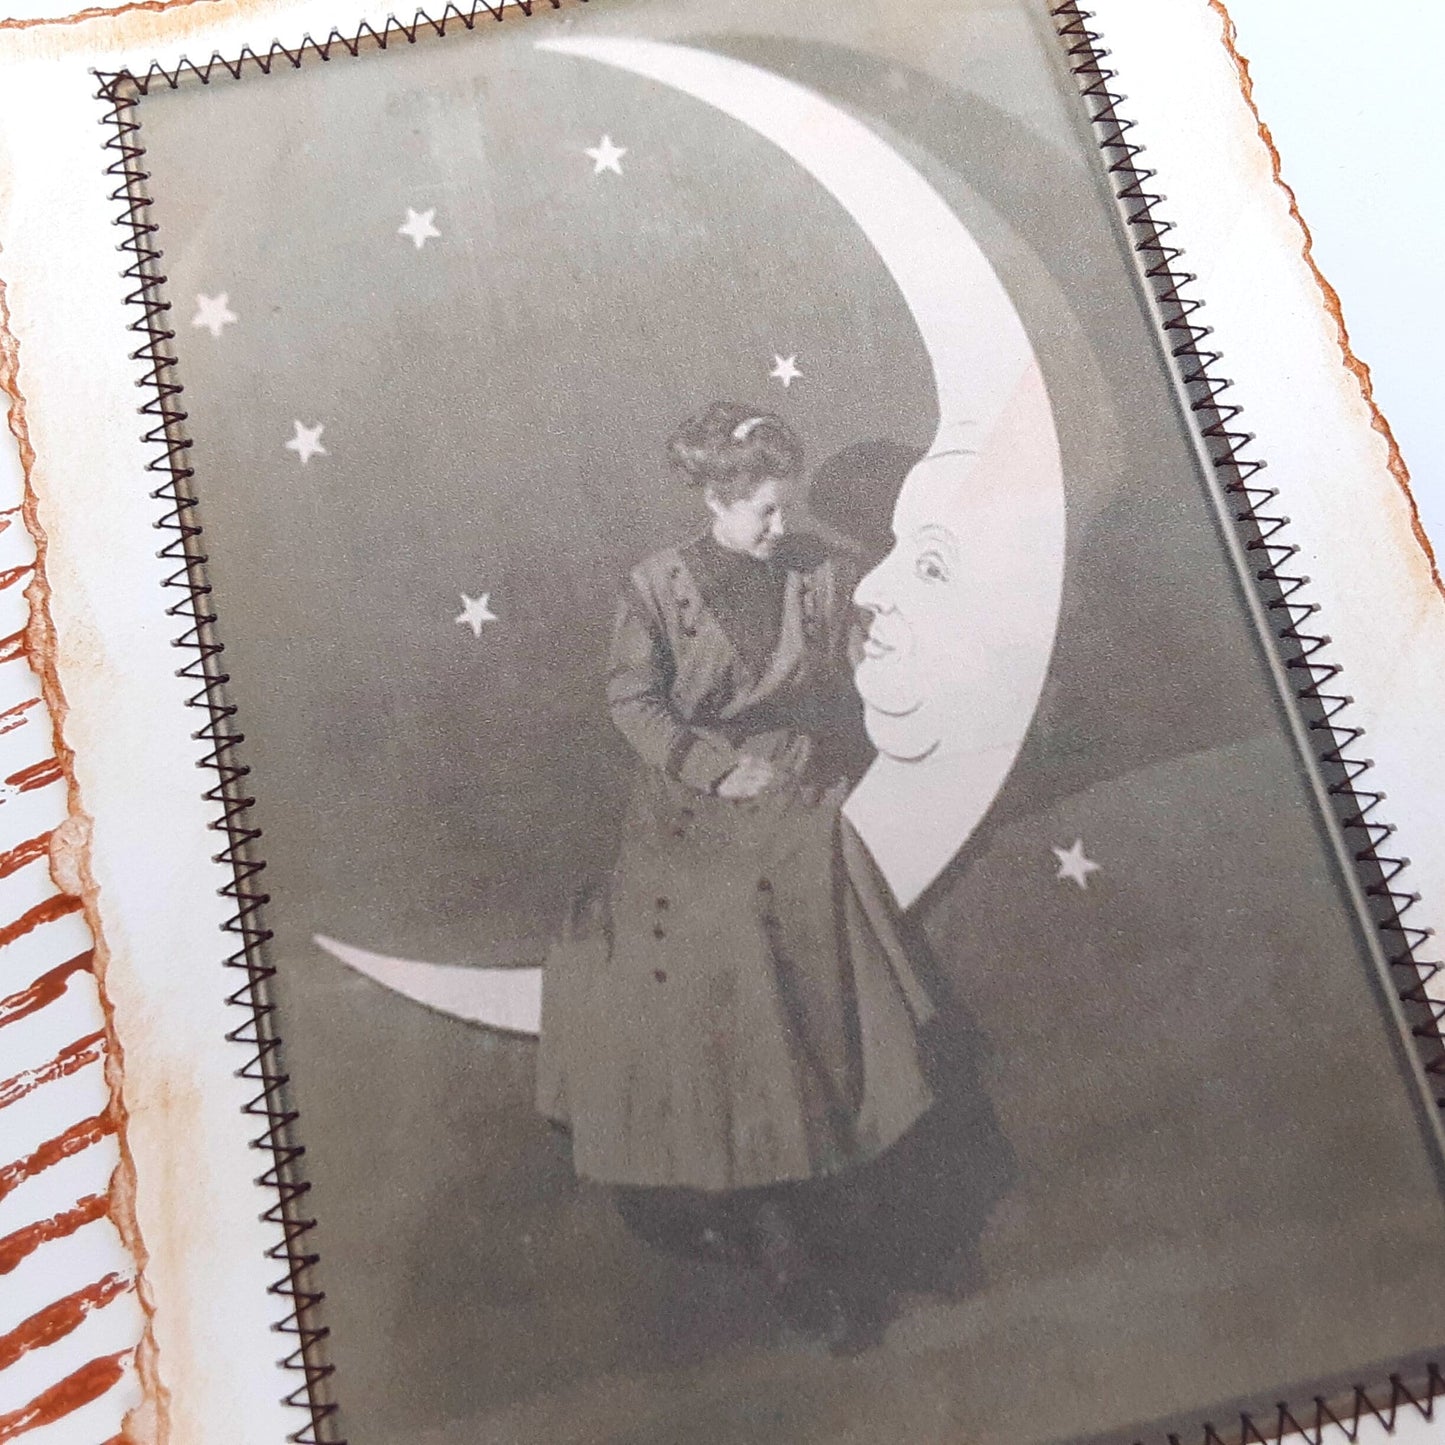 Journal Cards with Vintage Moon Photos, Junk Journal Page Inserts, Set of 5